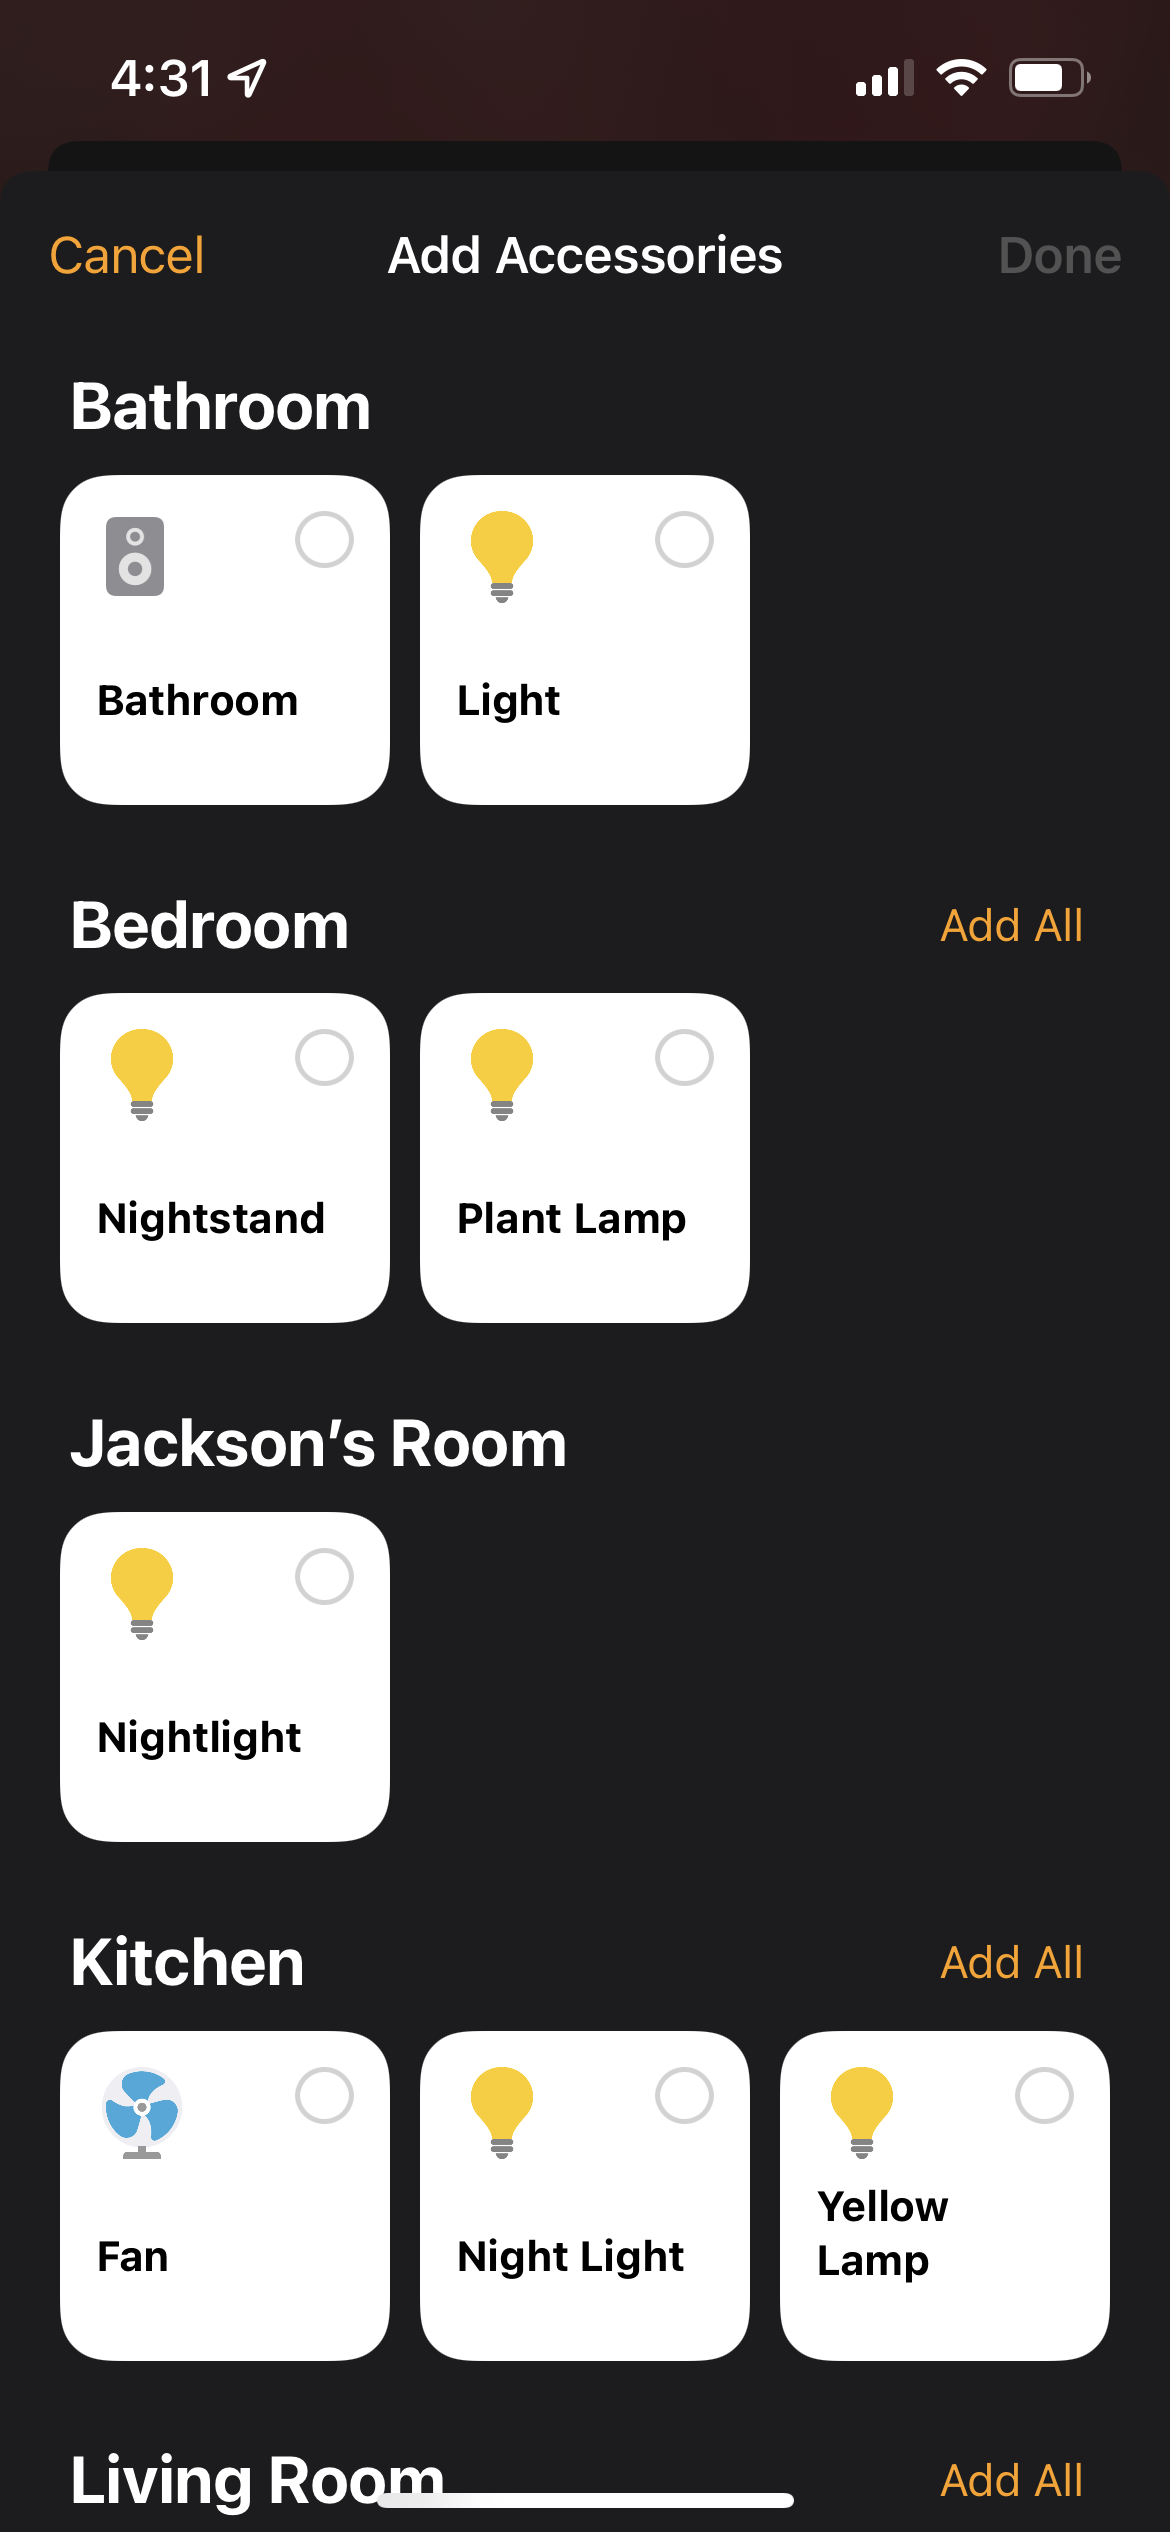 Picking accessories for a HomeKit scene